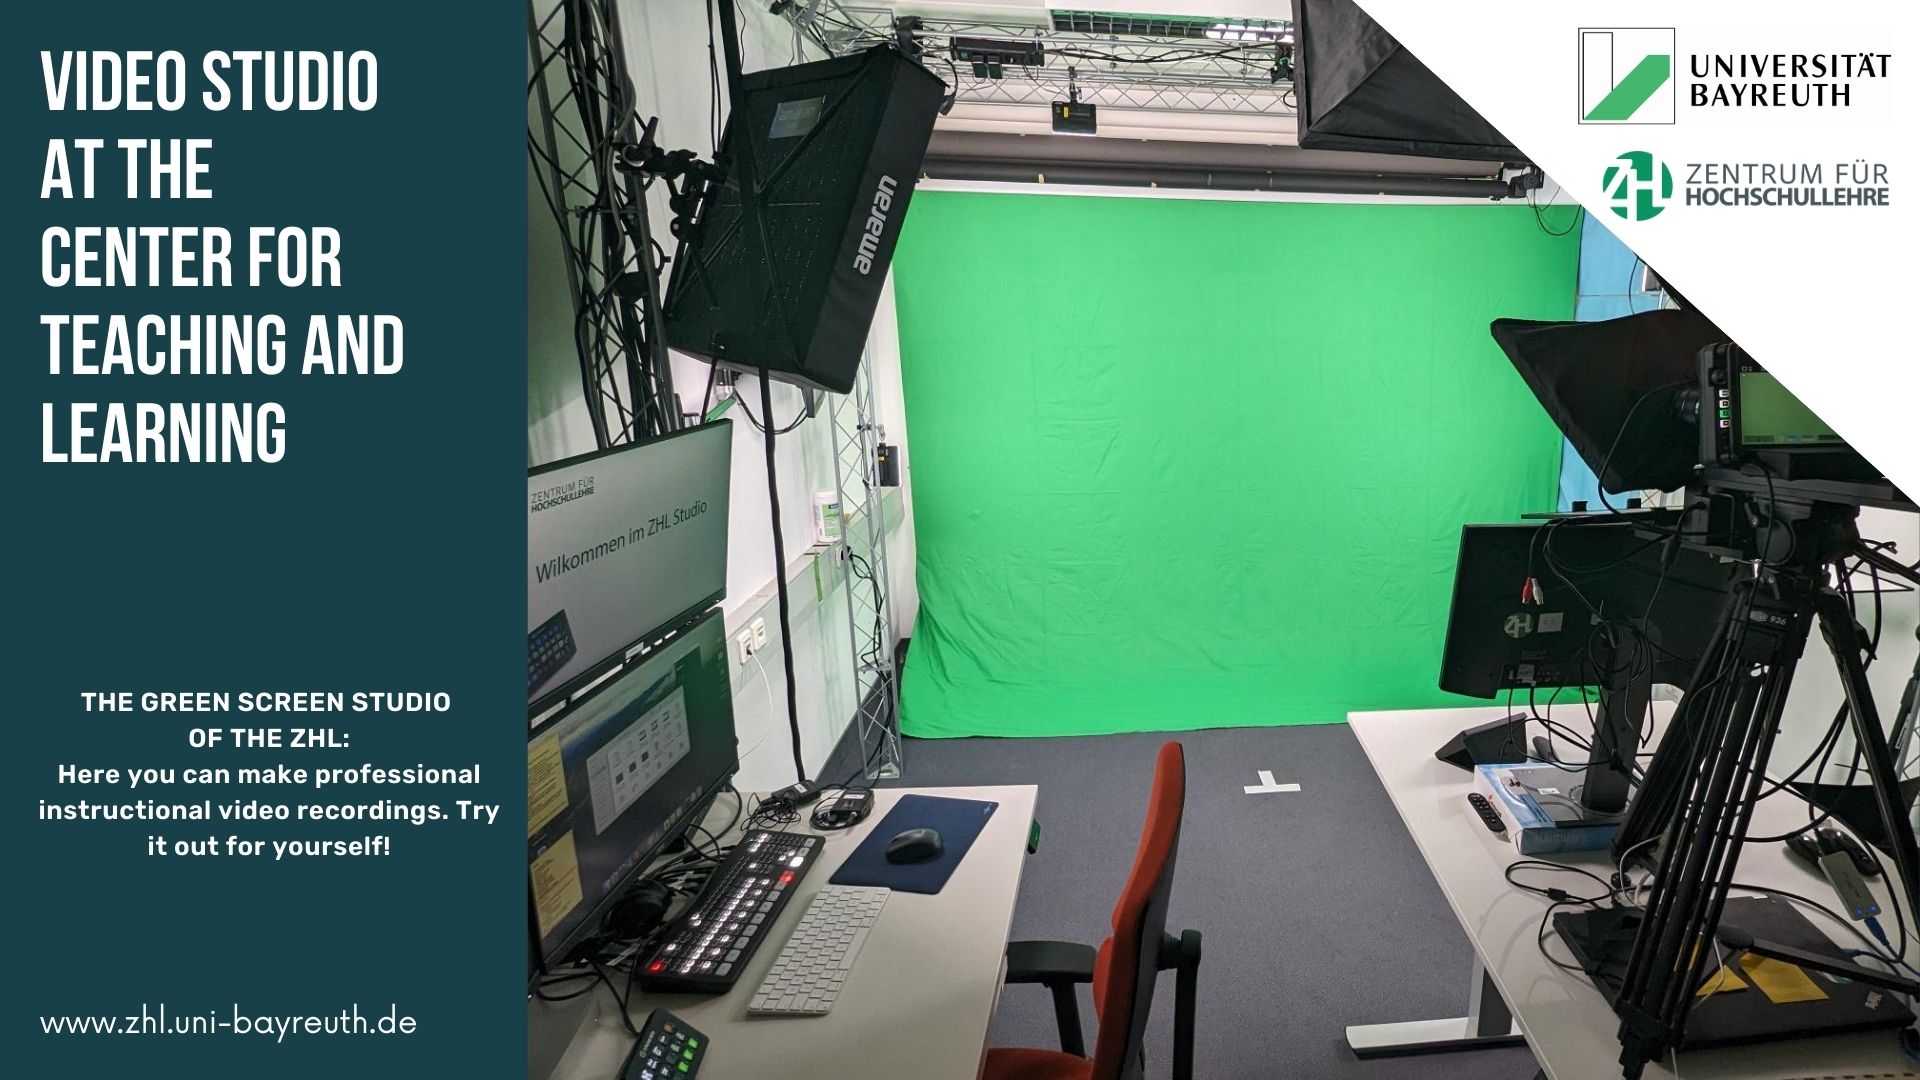 The Centre for University Teaching has set up the video studio to enable teaching with digital teaching materials and videos. Teachers can record themselves and independently select and record dozens of different video formats.